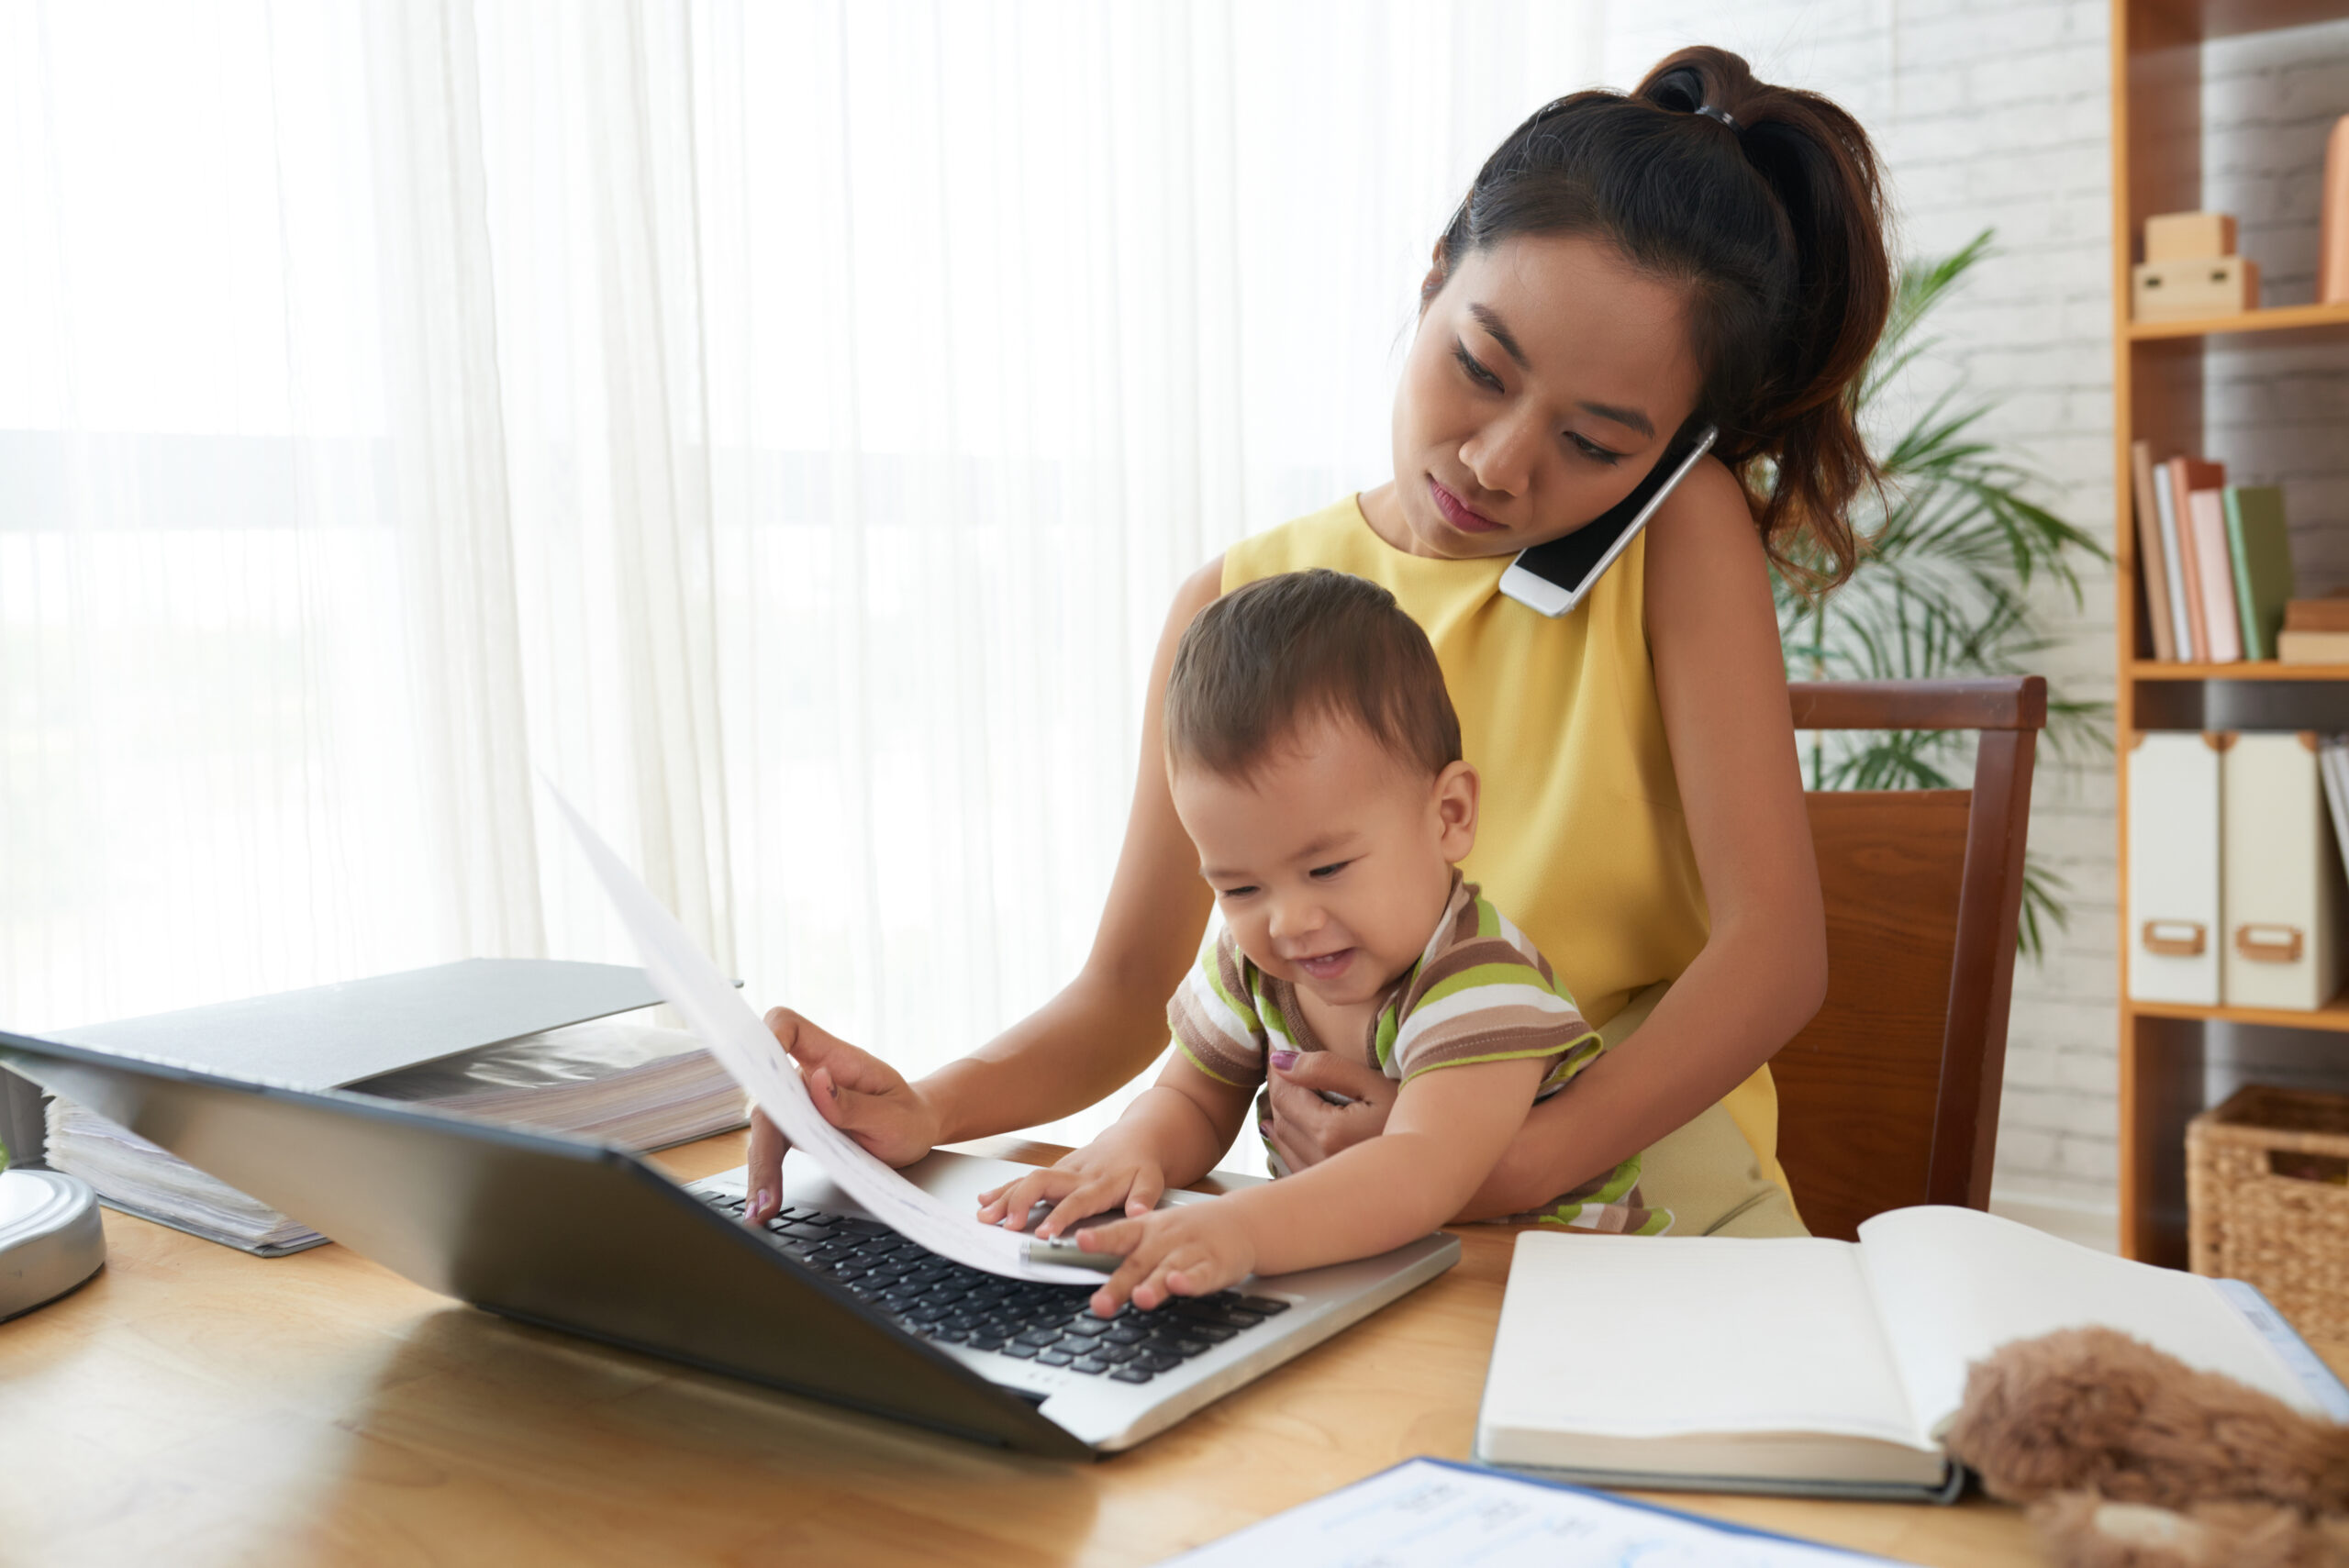 Federal Action on Child Care Essential for Small Business Owners